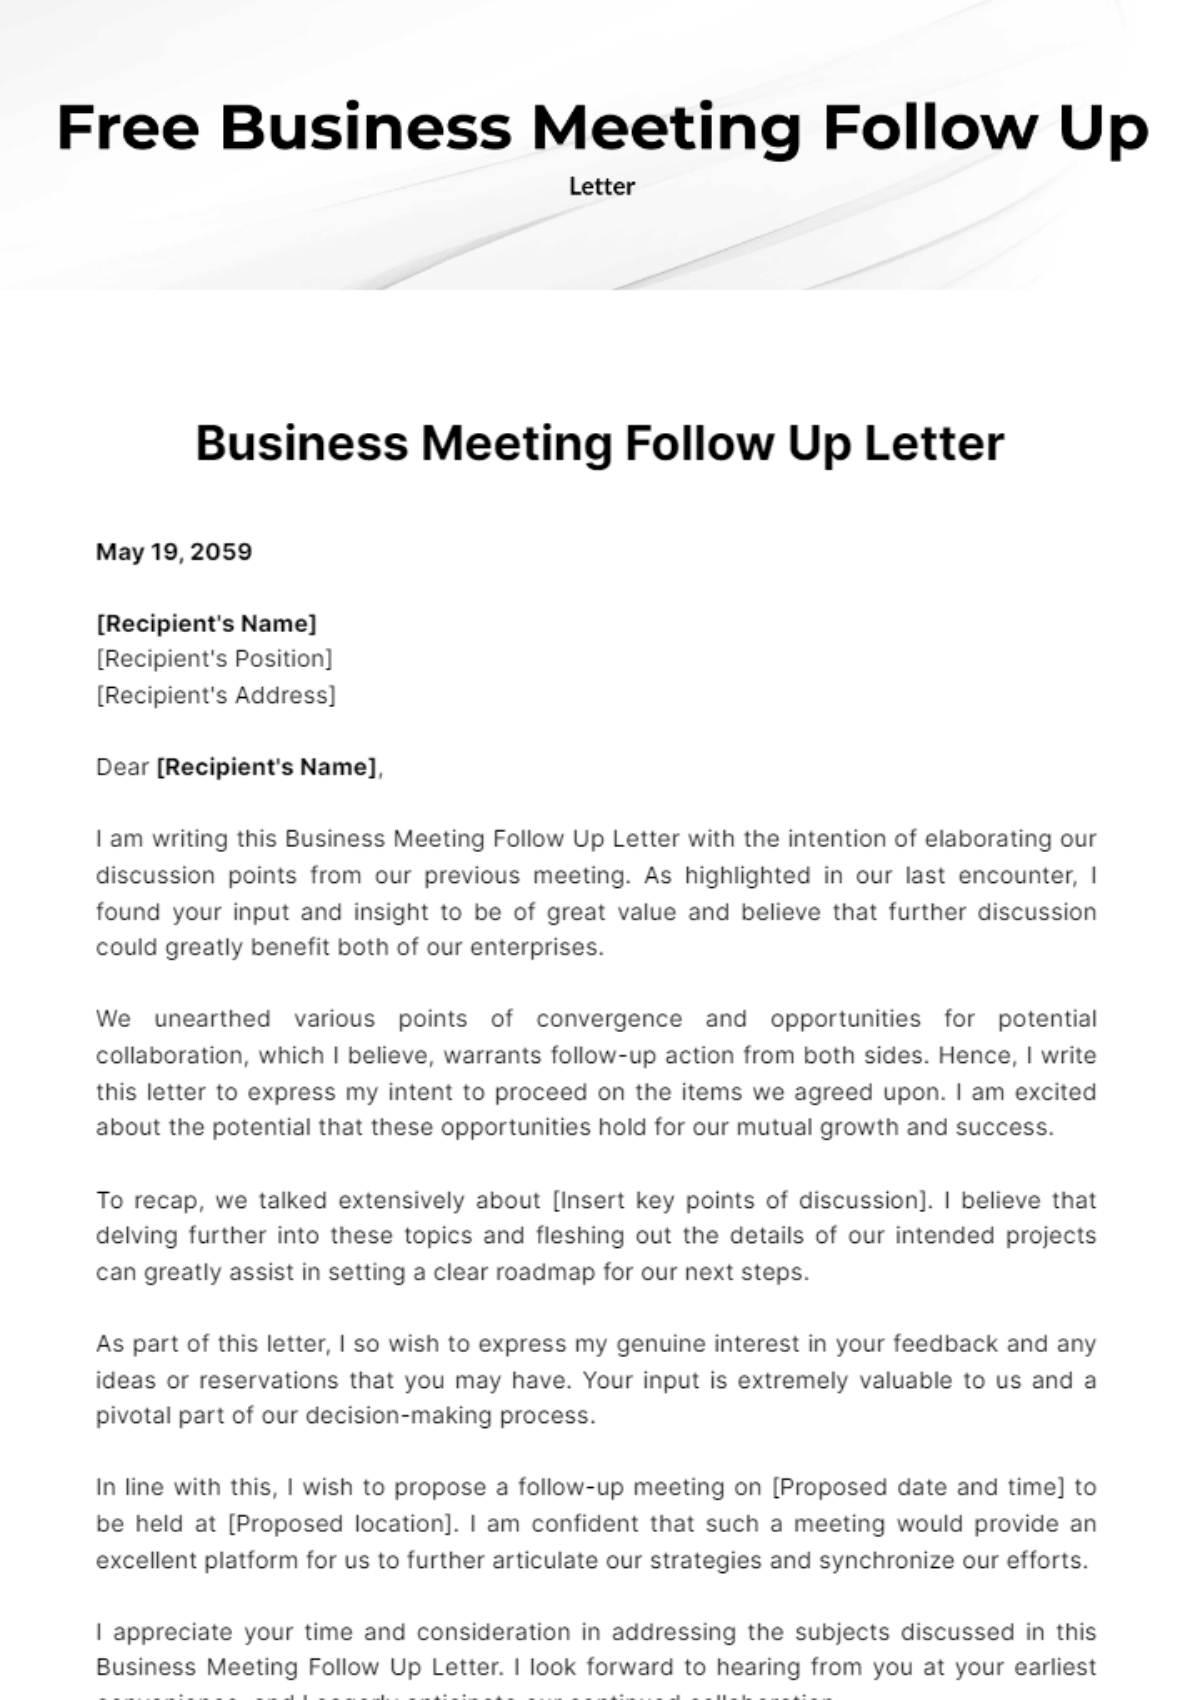 Free Business Meeting Follow Up Letter Template